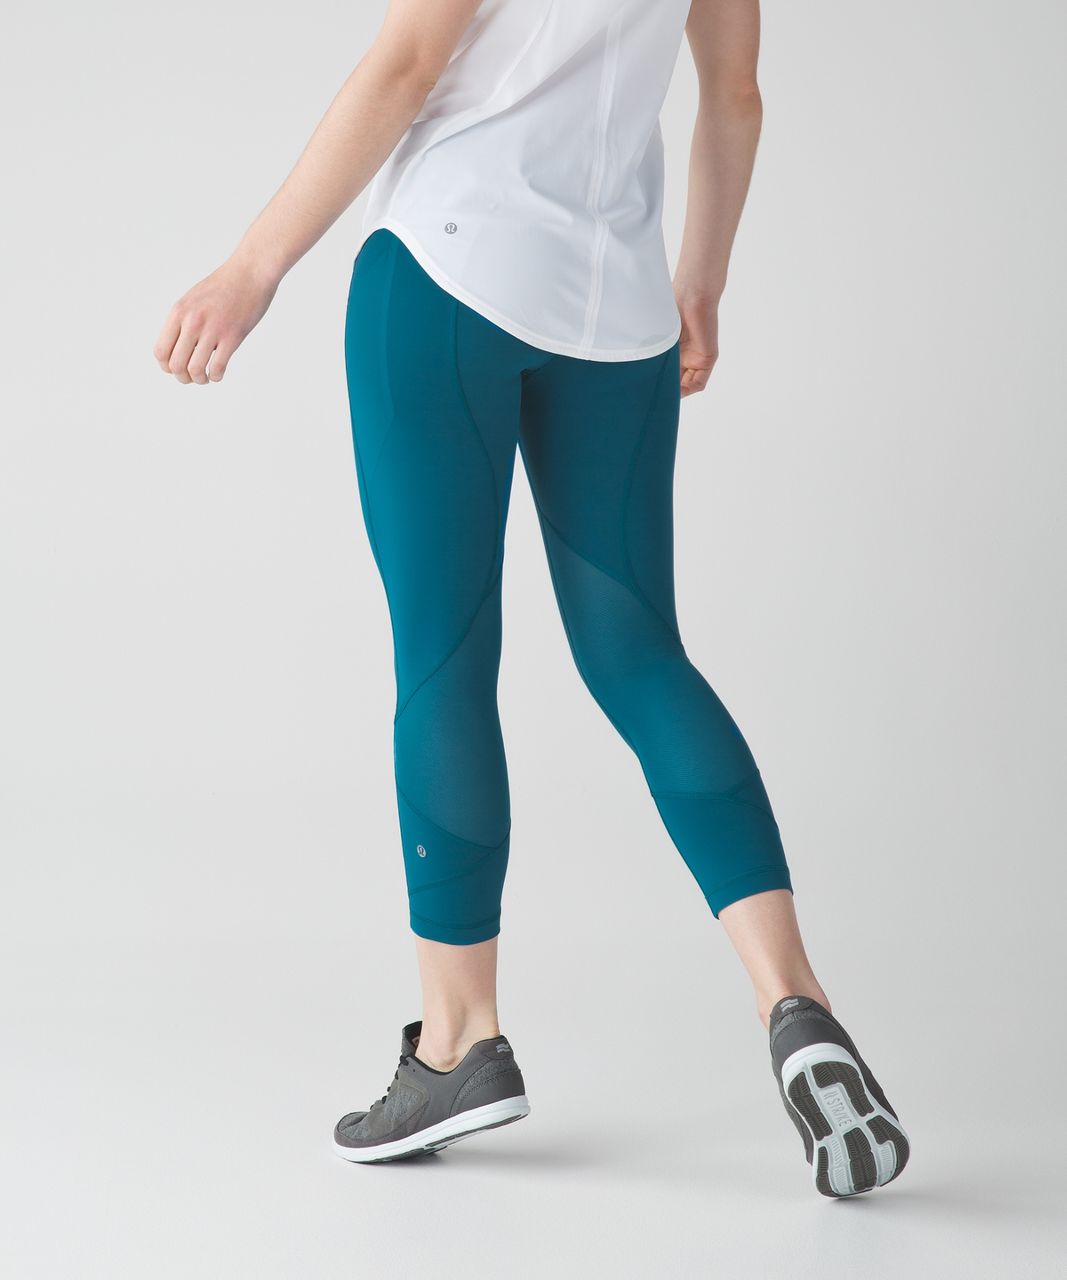 Lululemon Pace Rival Crop - Tofino Teal